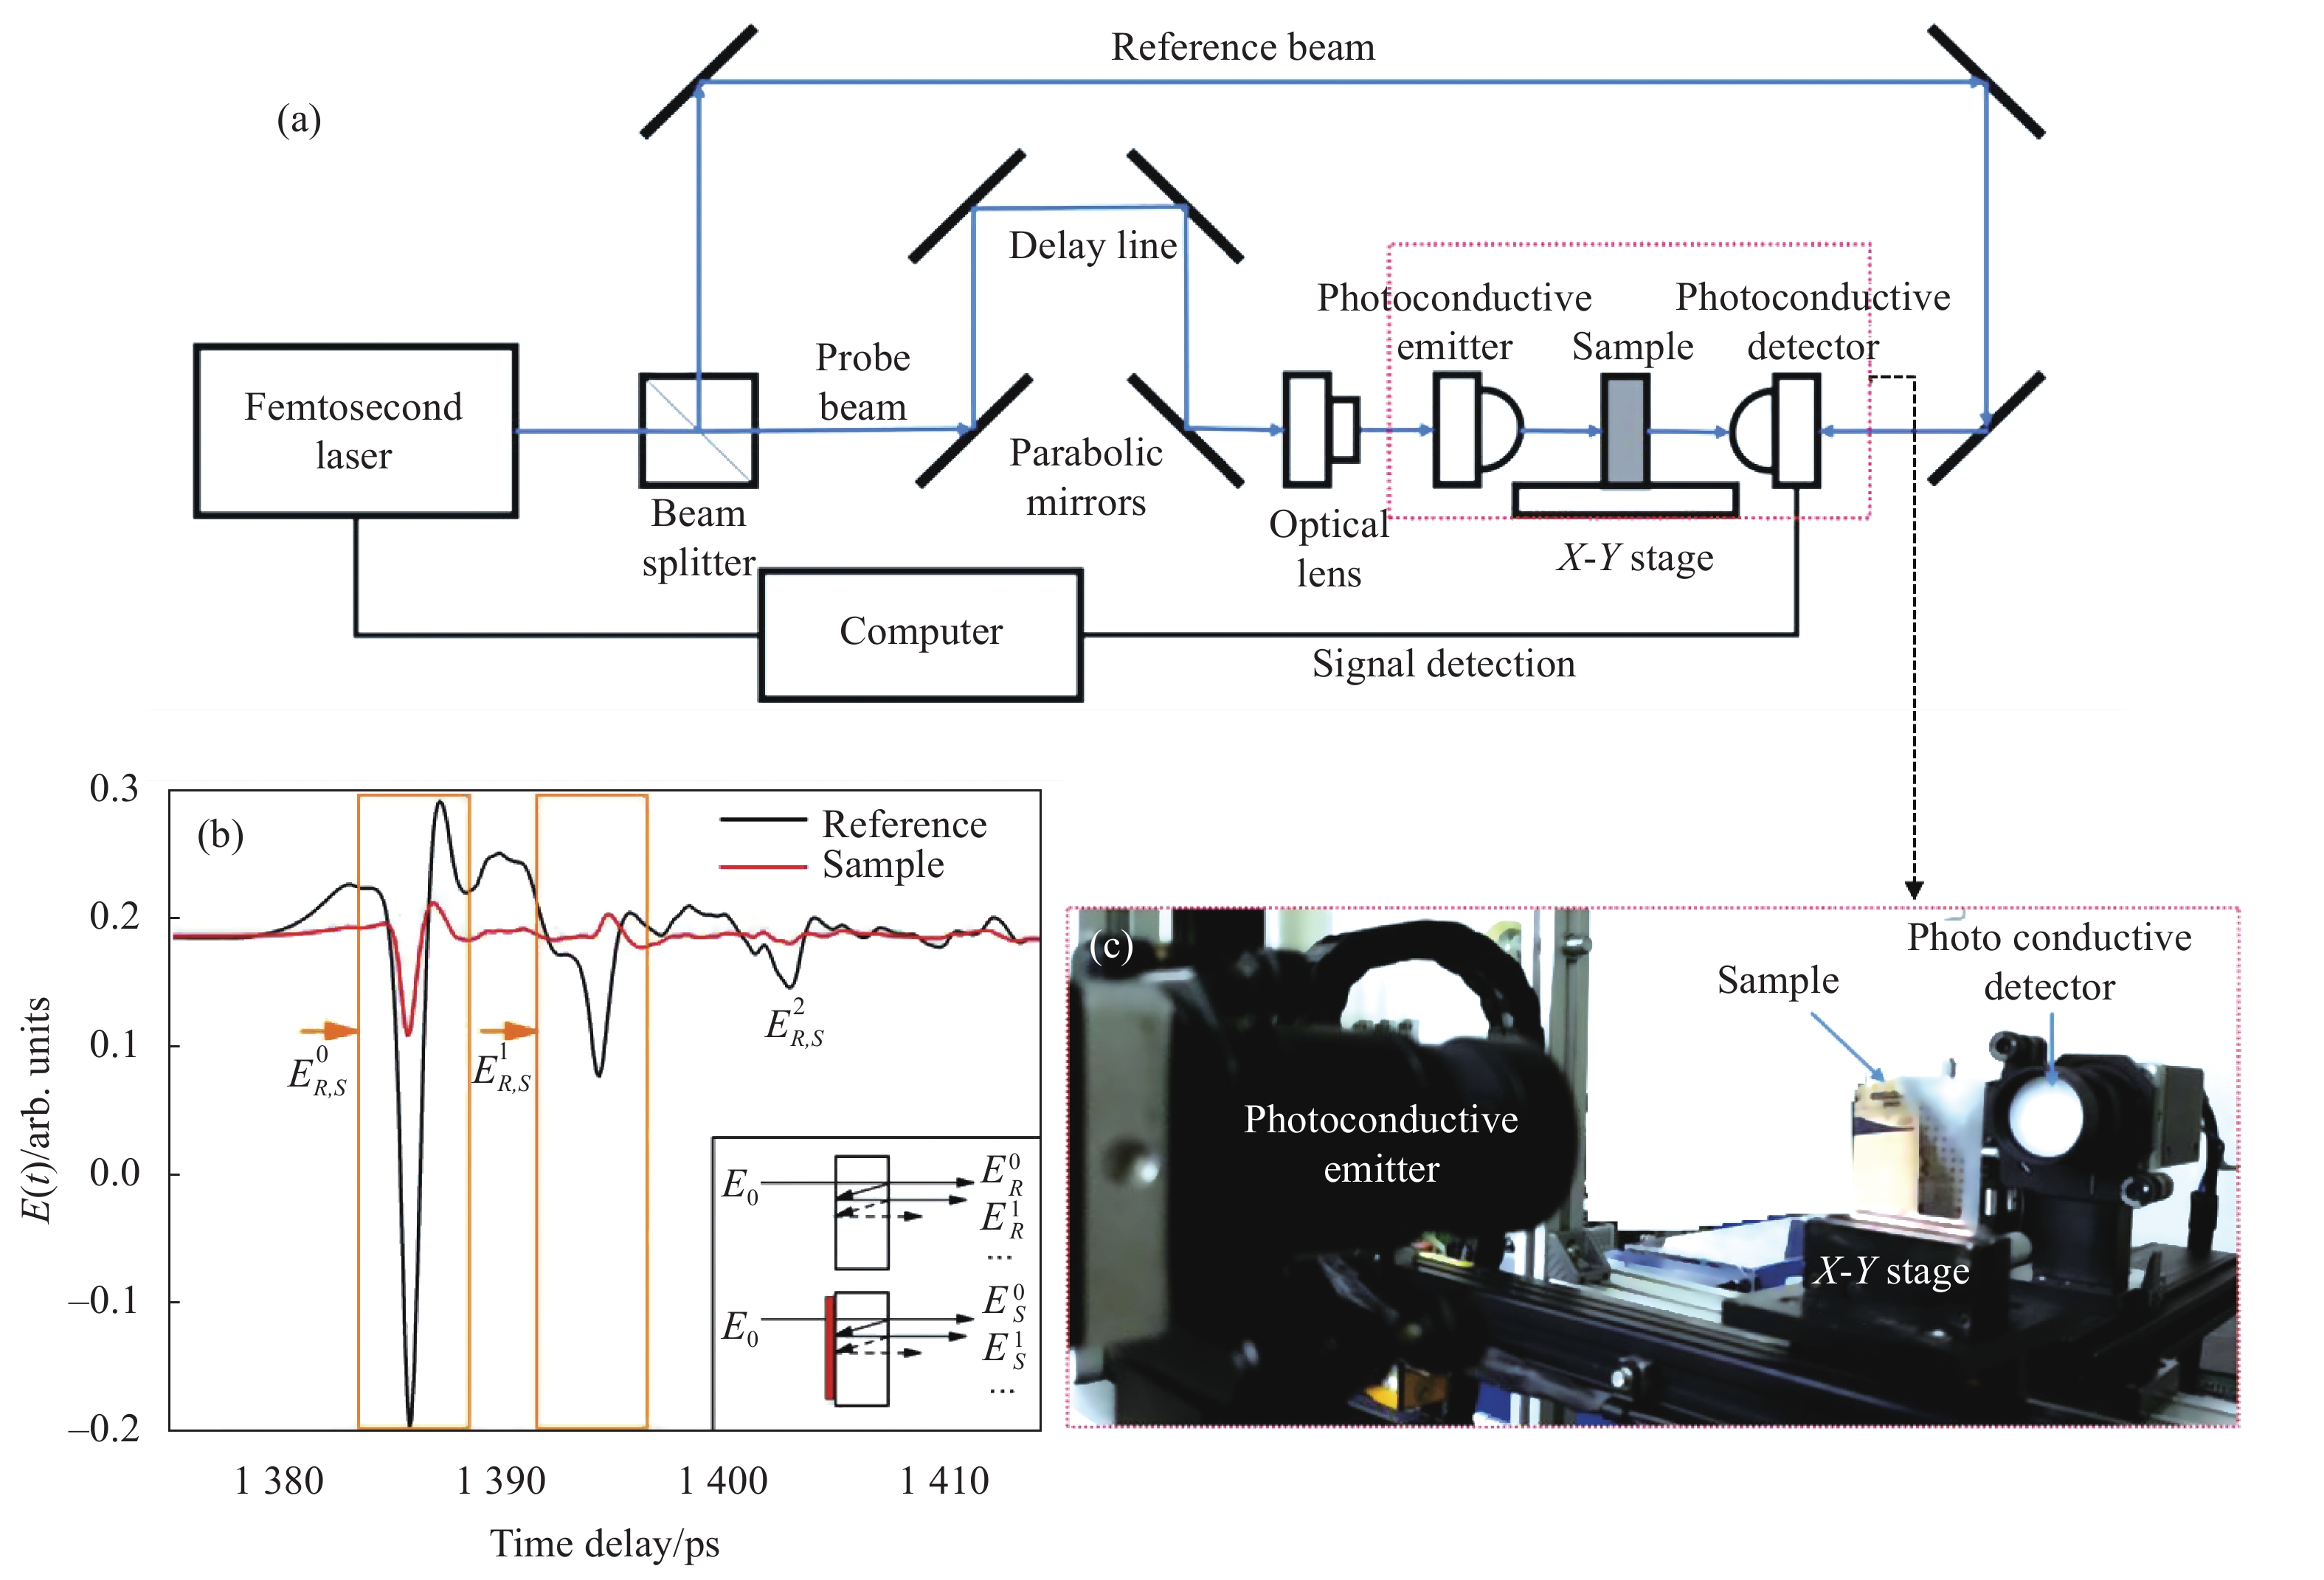 (a) Illustration of the THz mapping detection system in transmission mode; (b) THz time-domain spectra of the periodic temporal signals from multiple internal reflections; (c) Experimental setup of the THz emitter, the sample stage and the photoconductive detector